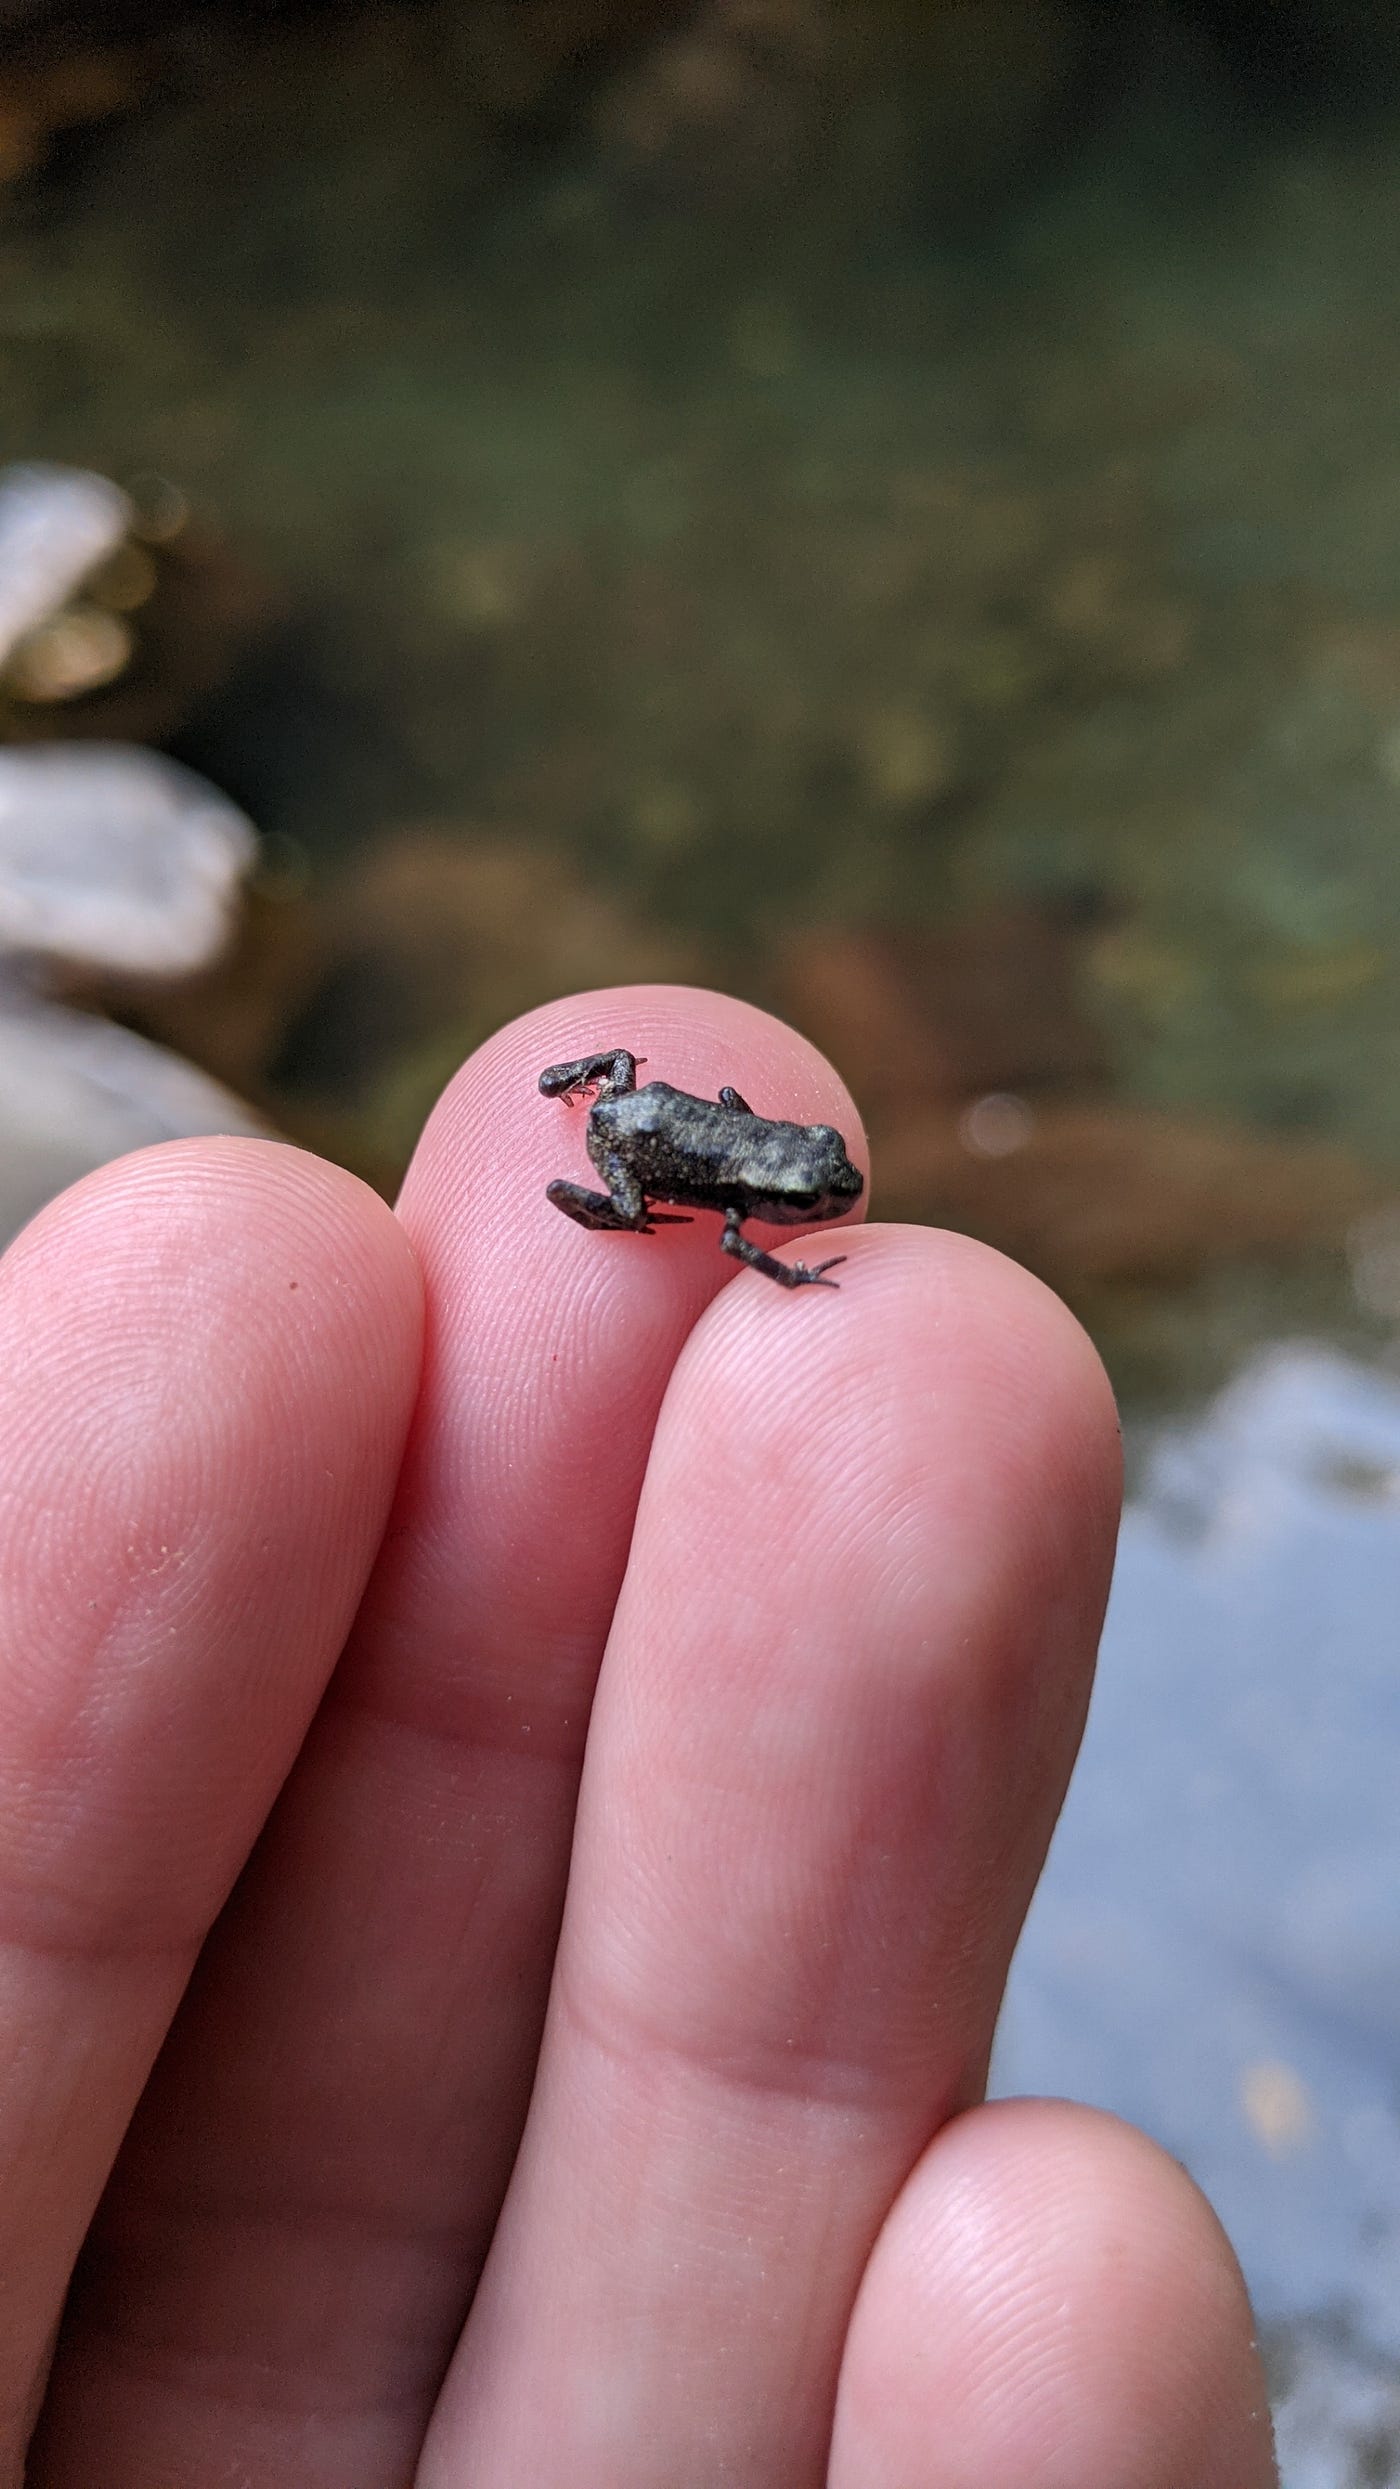 the smallest frog in the world